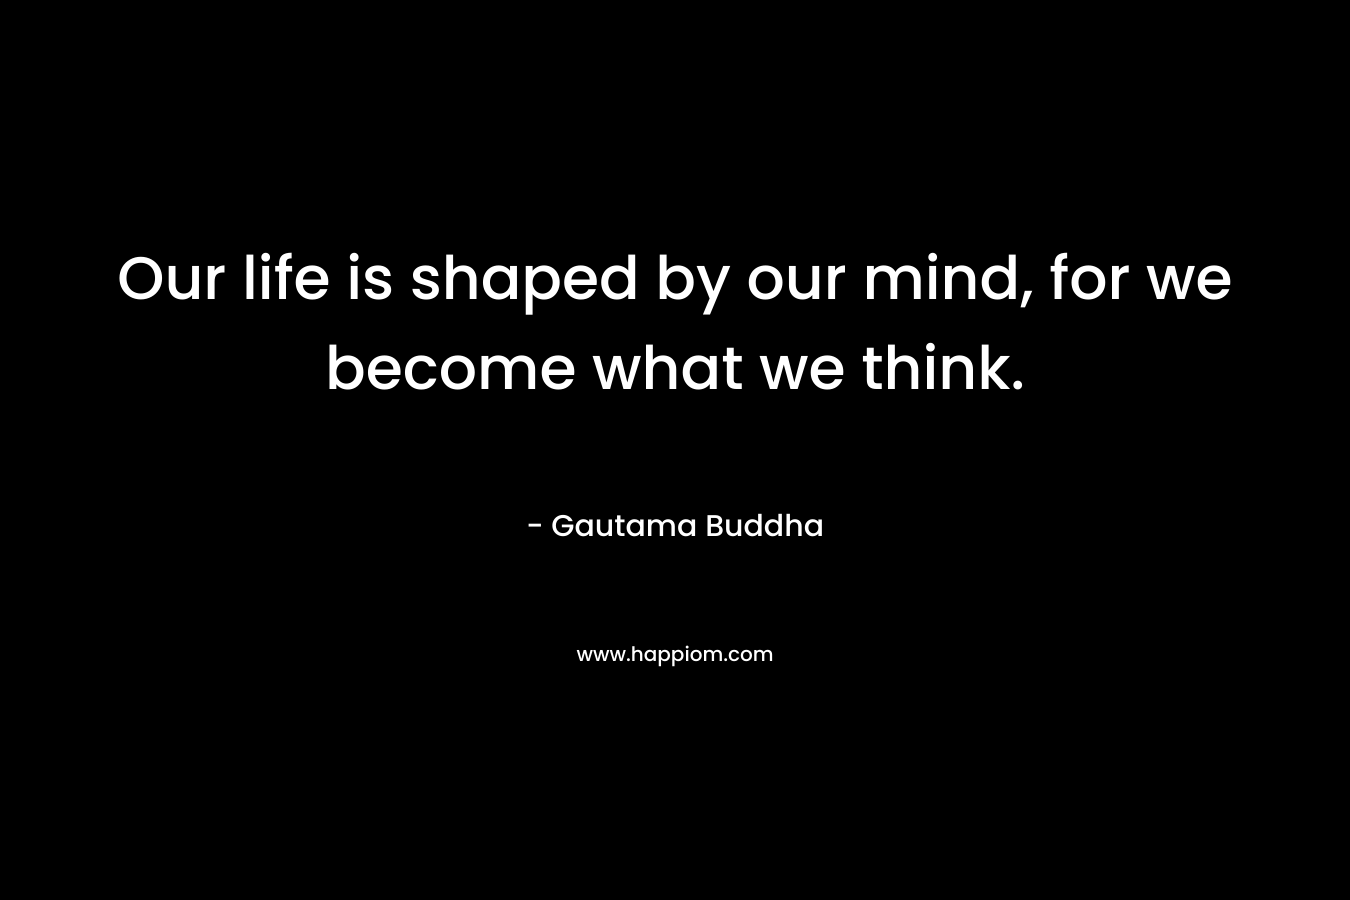 Our life is shaped by our mind, for we become what we think.